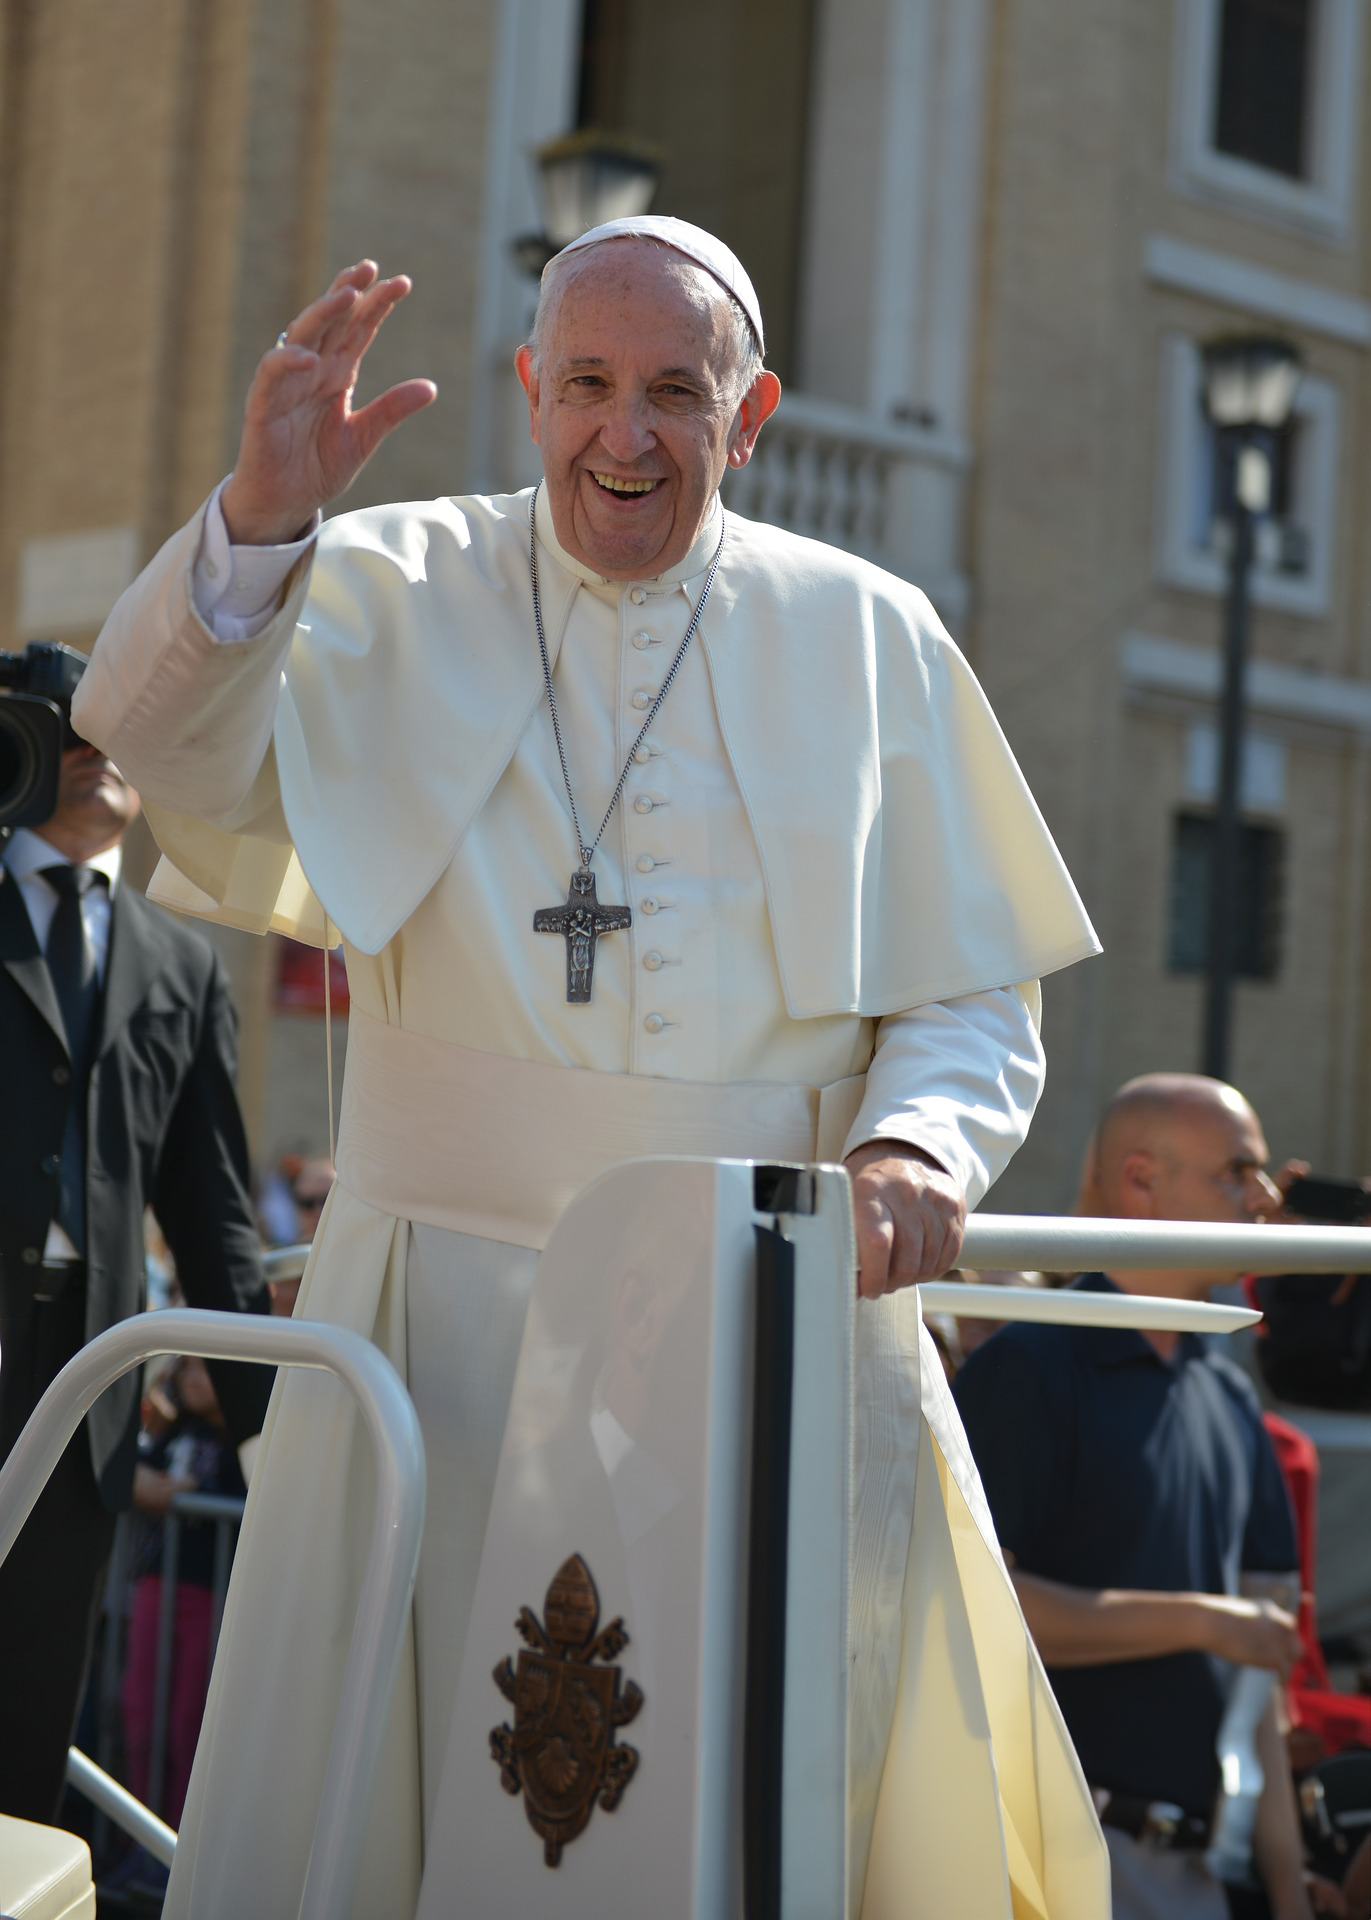 Pope Francis is standing in front of a crowd and waving.